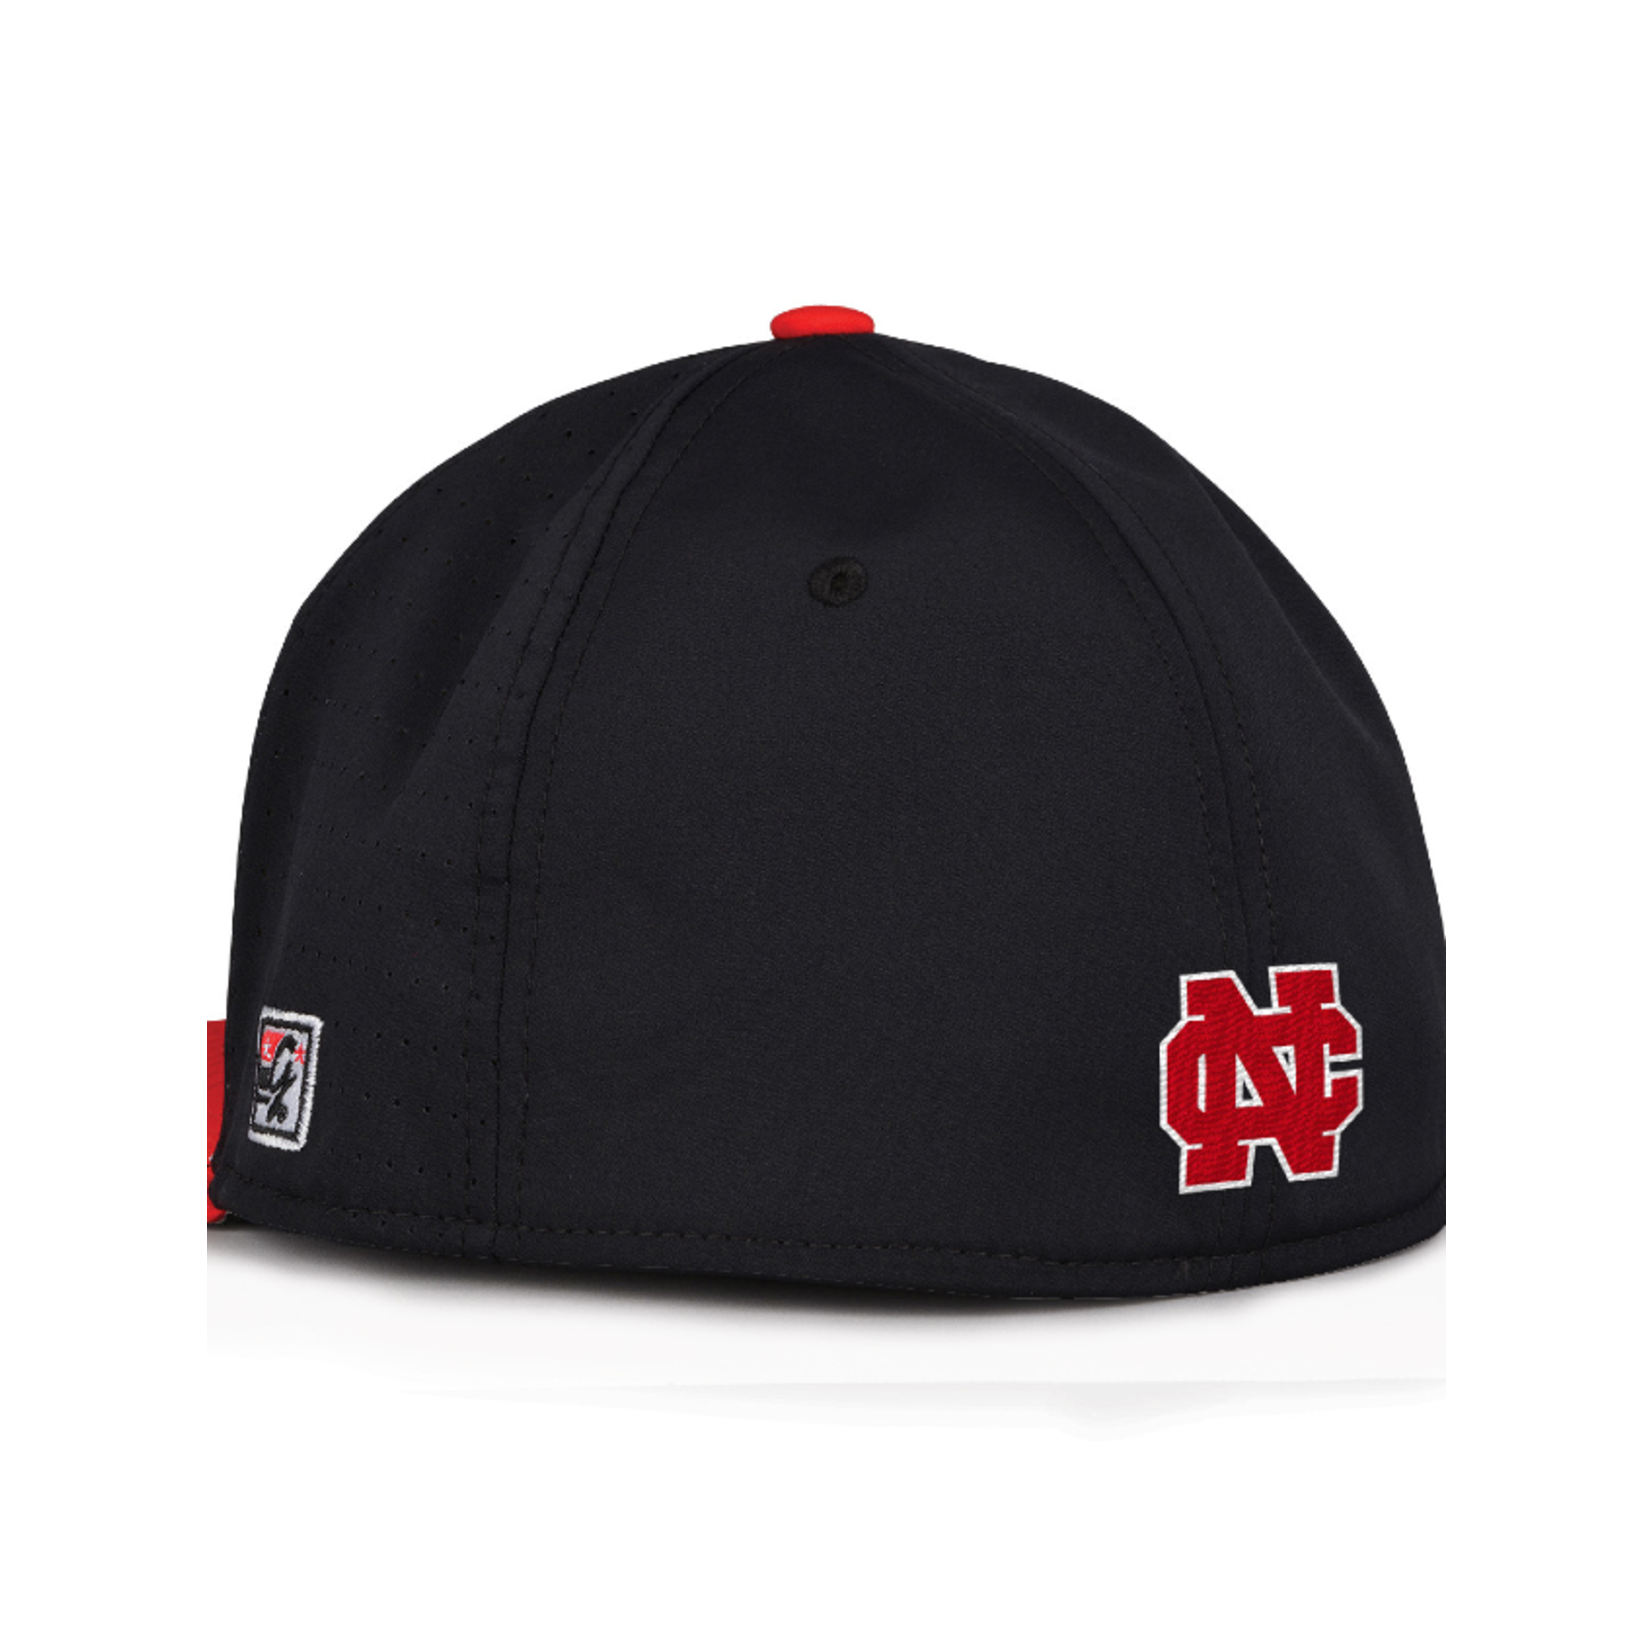 The Game Team style On the Field  Baseball hat Cardinal Head